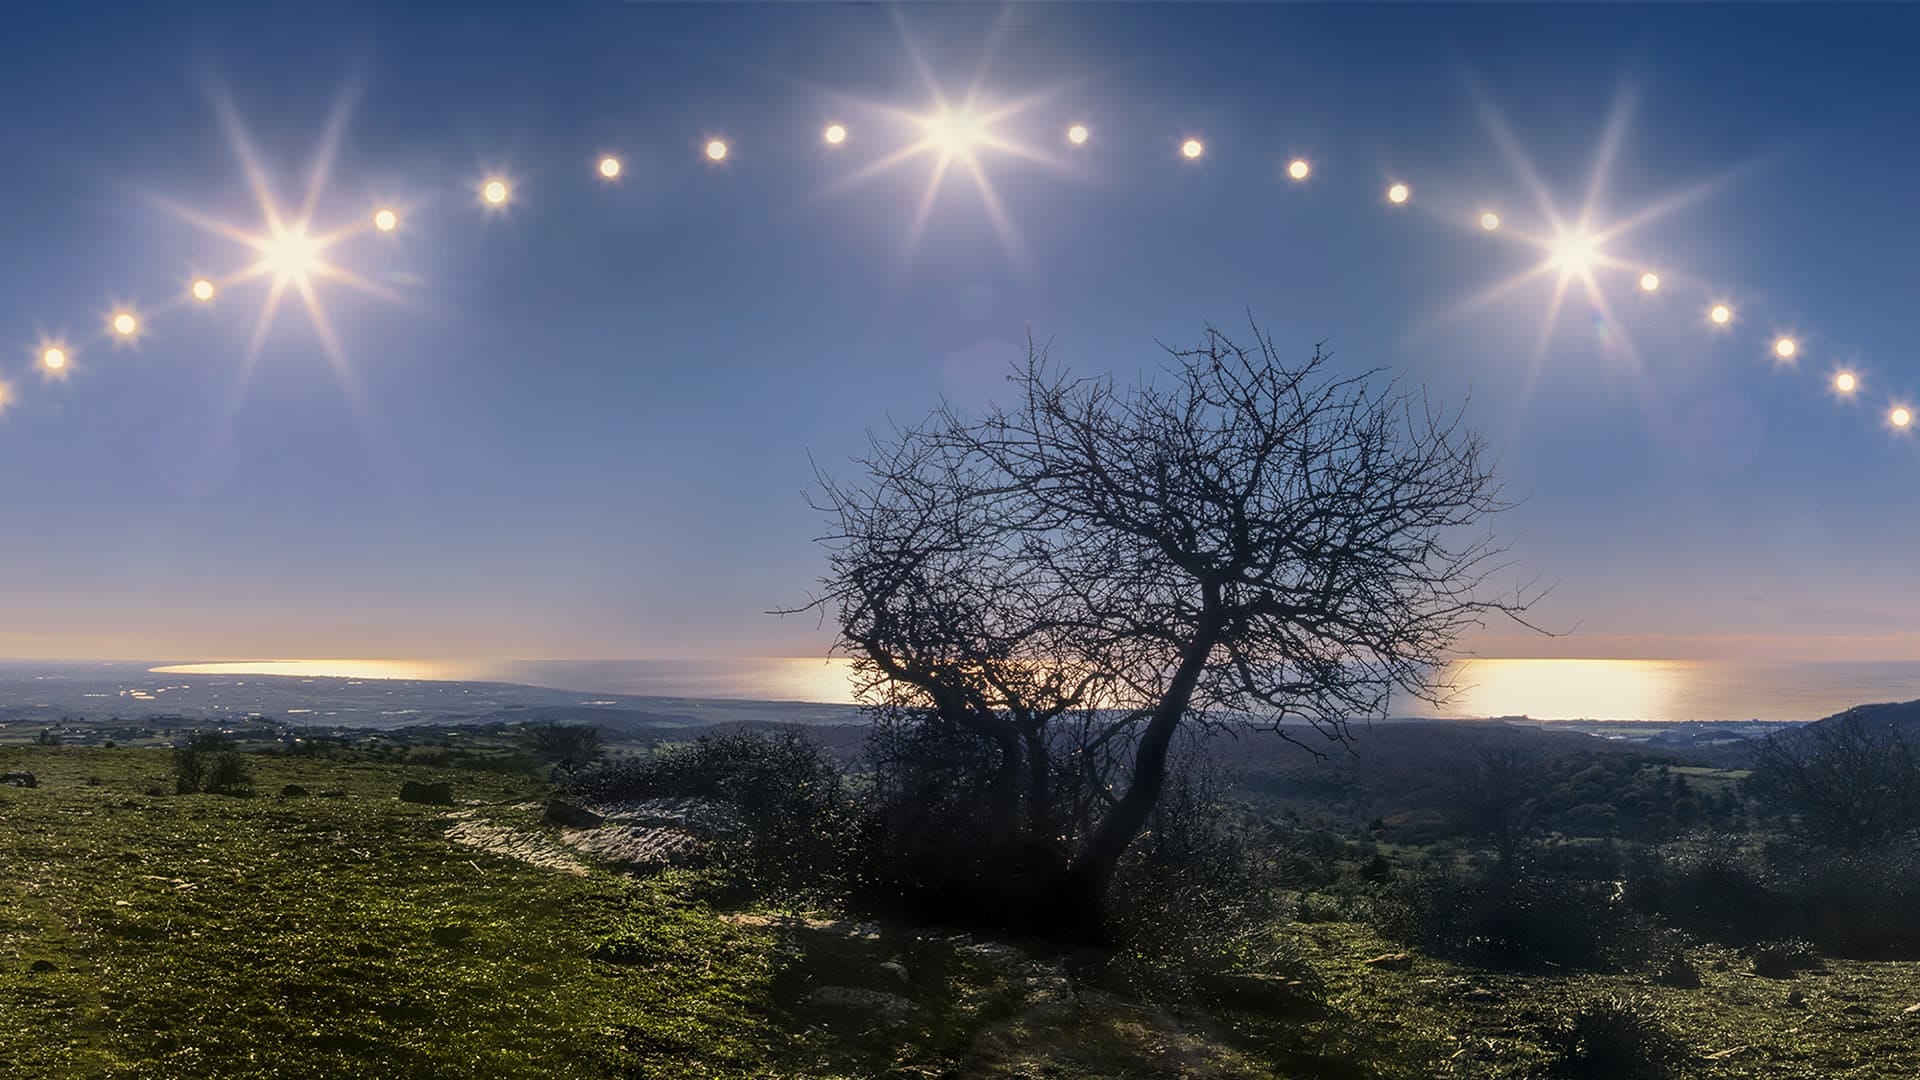 Solstice in June: When Does the New Season Start?